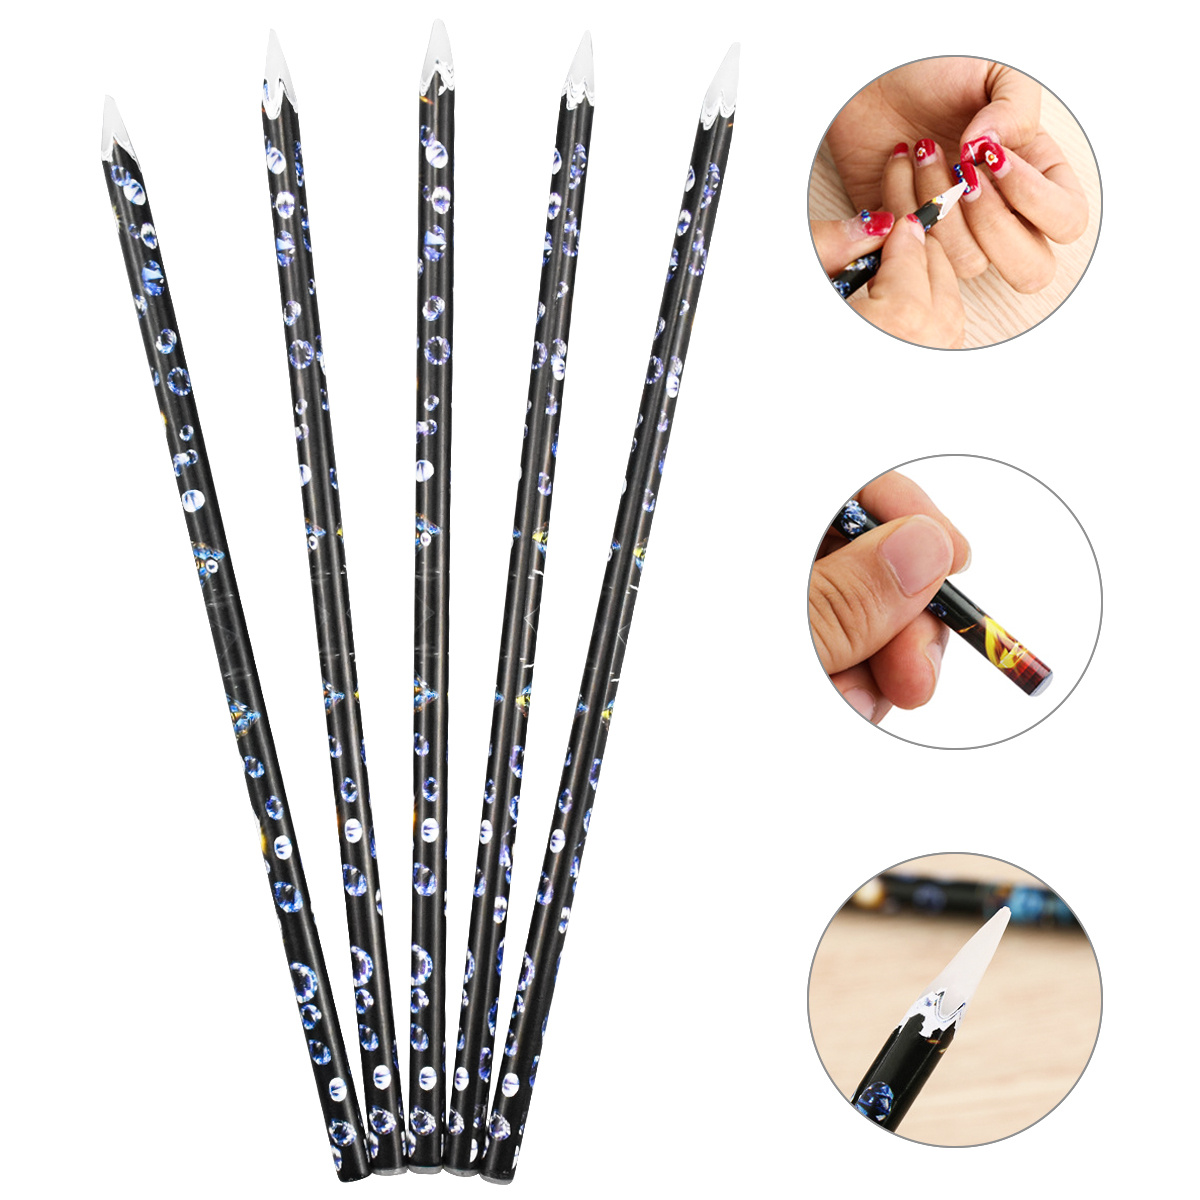 Duhgbne 10 Pieces Wax Rhinestone Pickers Pencil Wax Pencil Set for Rhinestones Gem Dotting Pick Up Tools, Size: One size, White